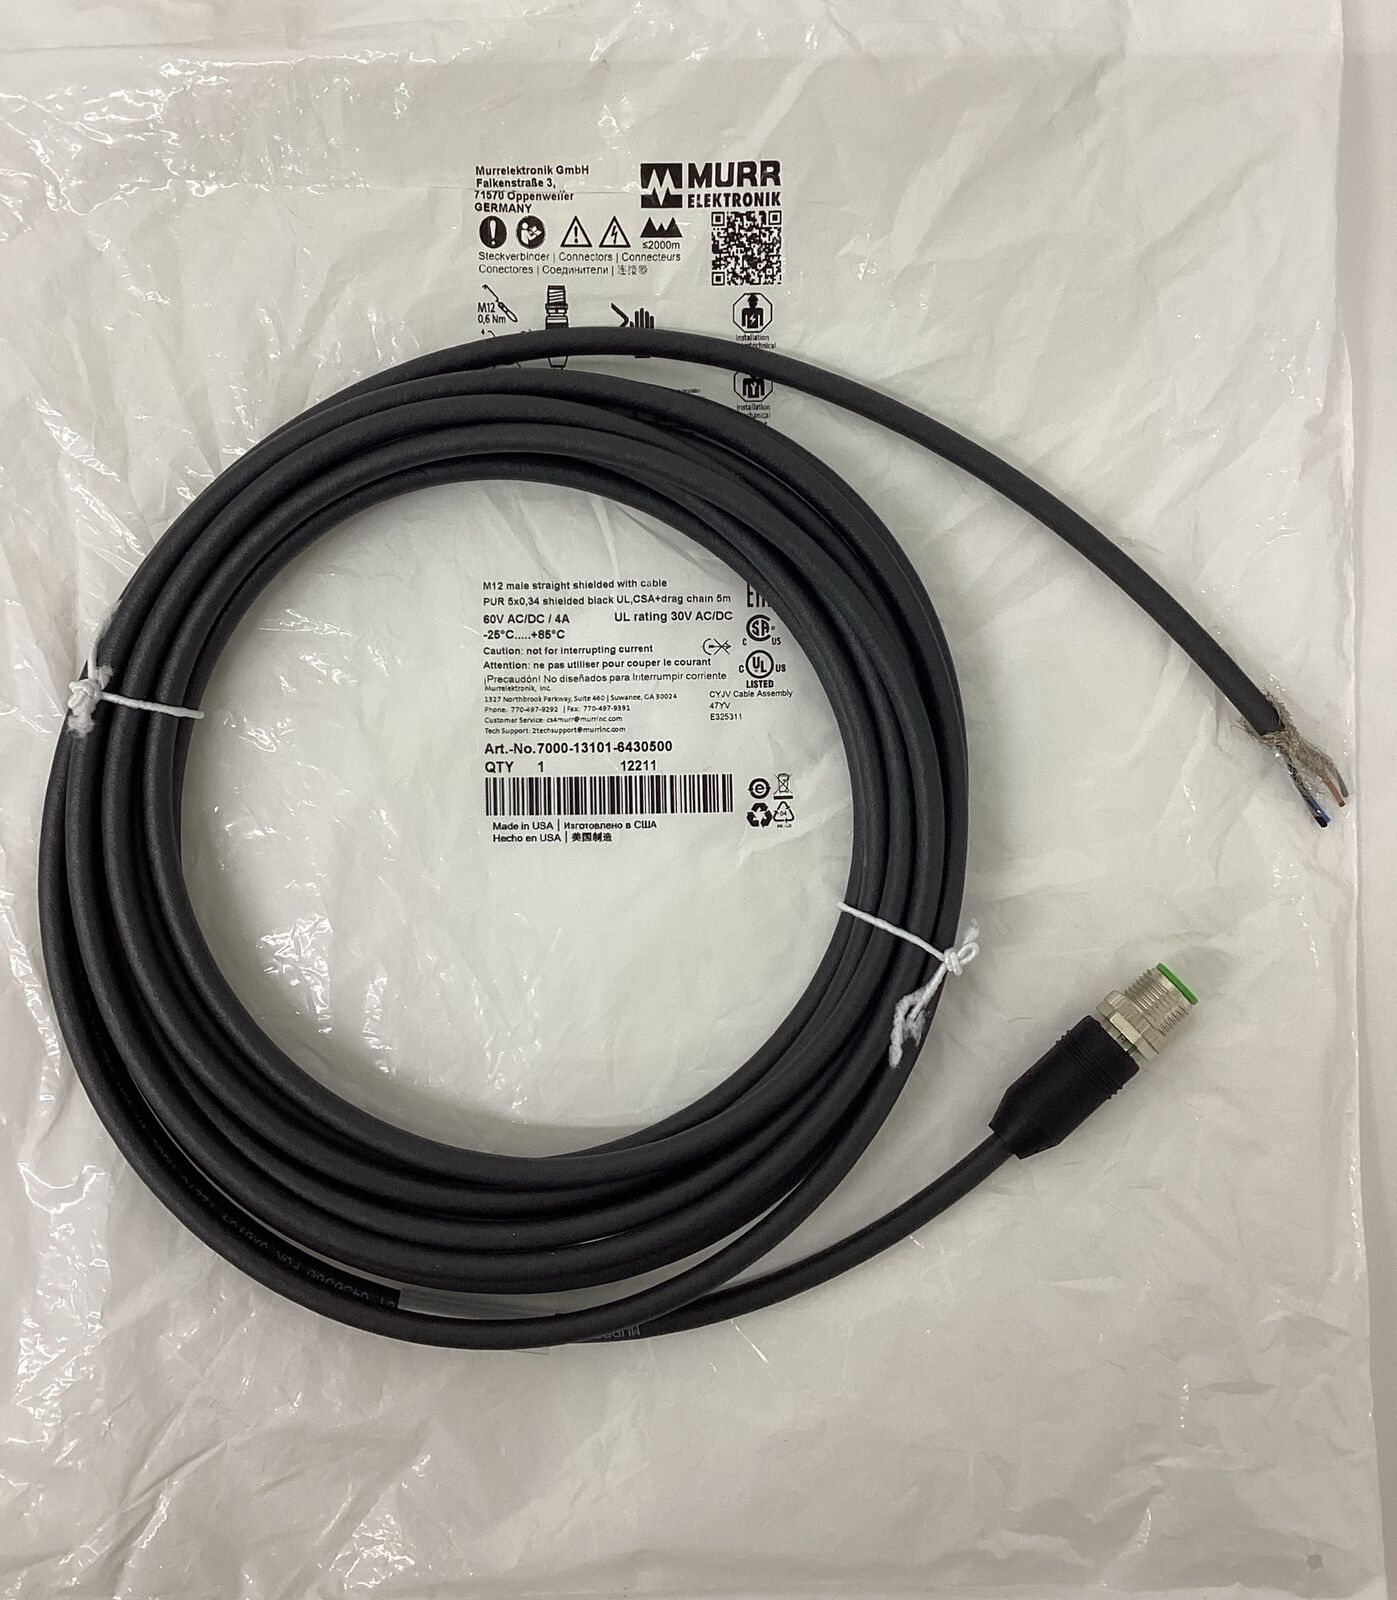 Murr 7000-13101-6430500 M12 Male Shielded Cable 5-Wire 5 Meters (CBL168)